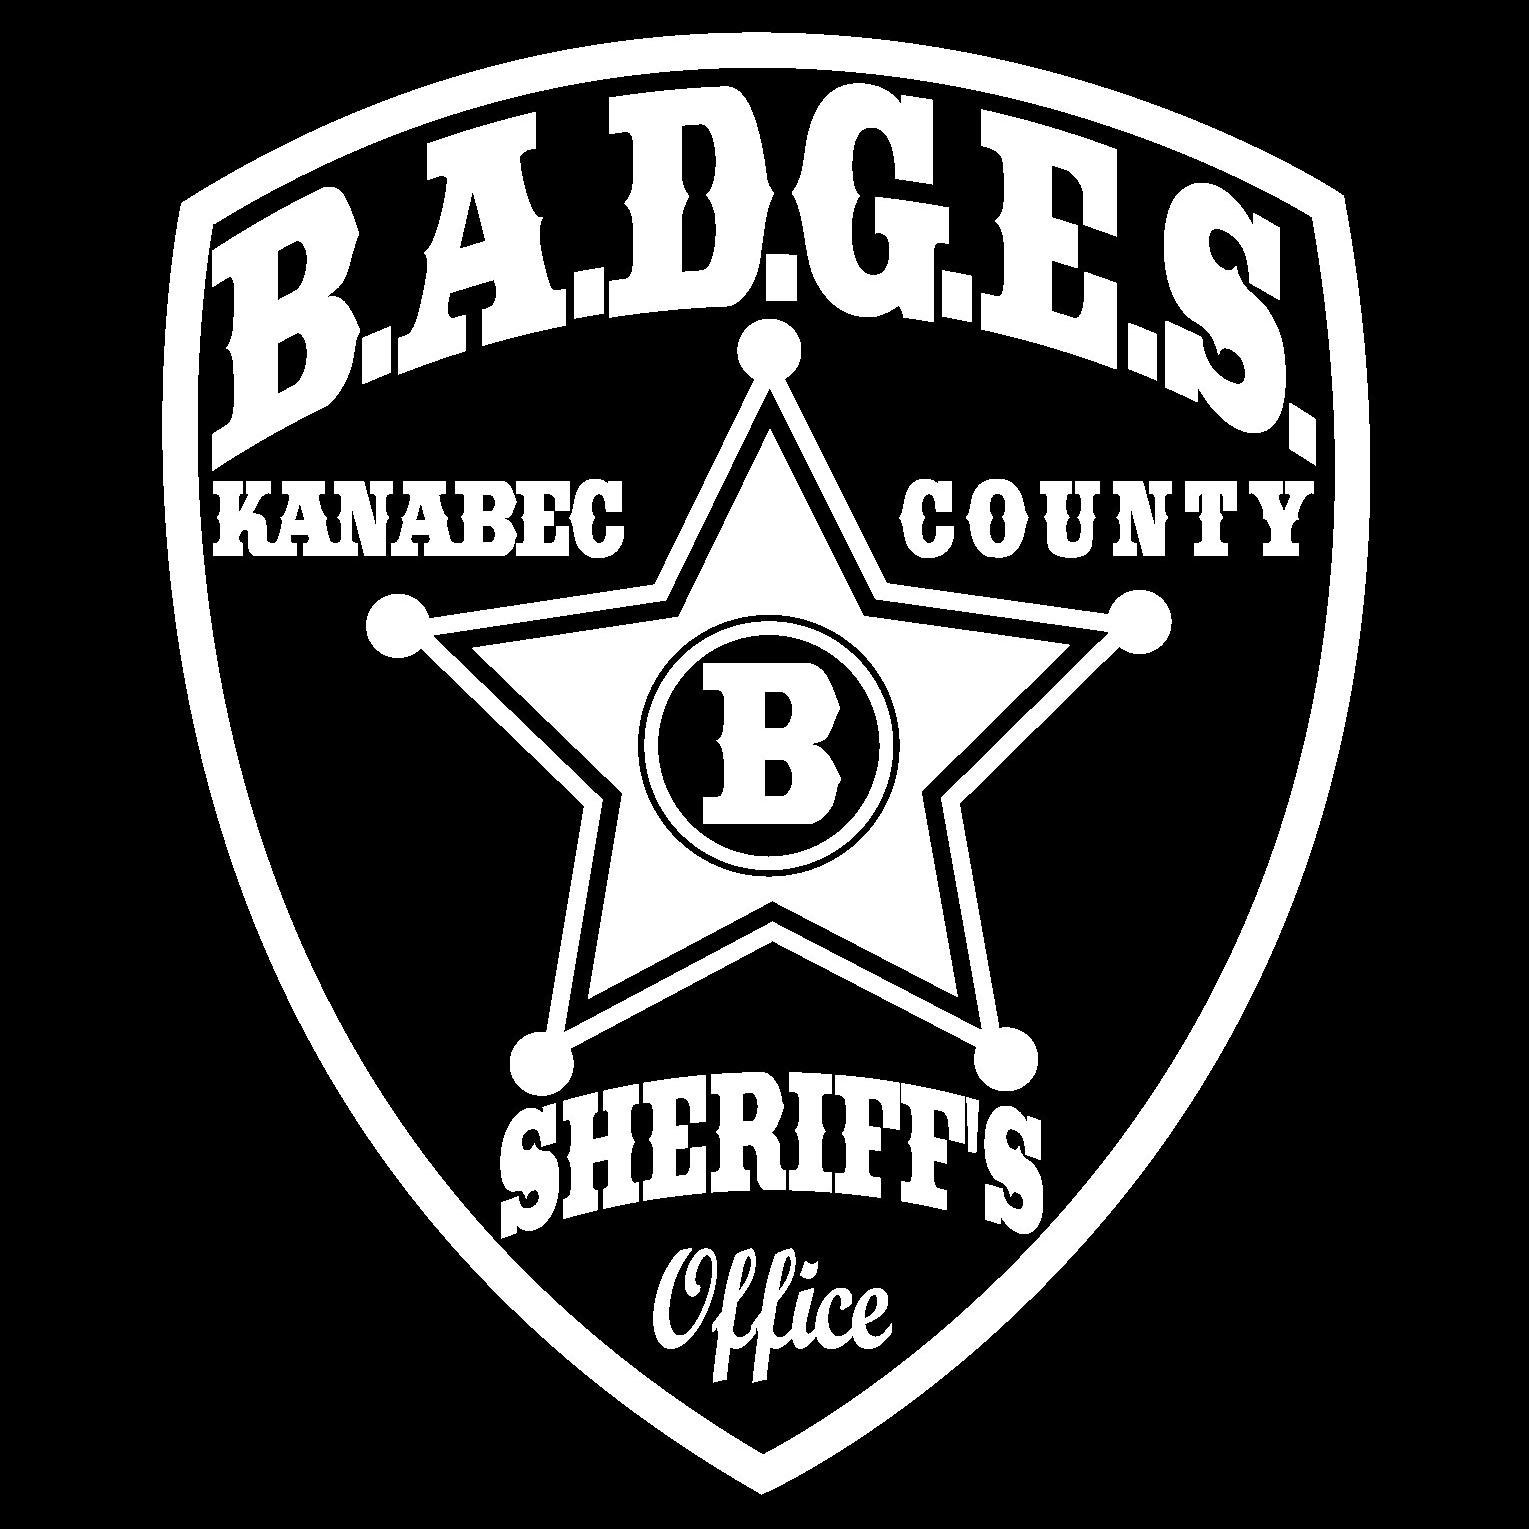 Building Awareness to Develop, Grow and Educate our Society. B.A.D.G.E.S is a community outreach group located in Kanabec County, Minnesota